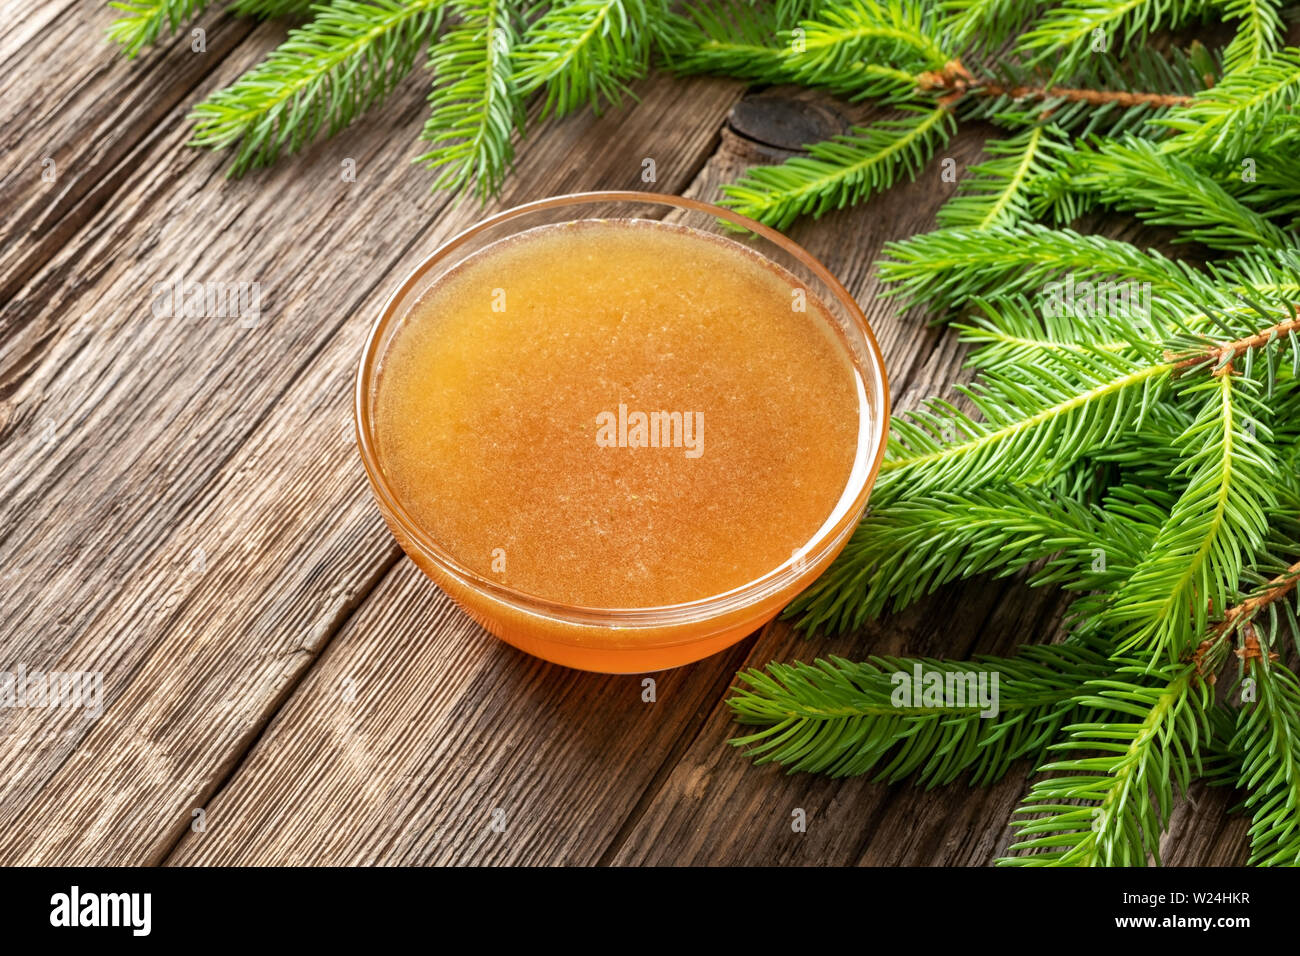 Homemade syrup against cough made from young spruce branches in spring Stock Photo